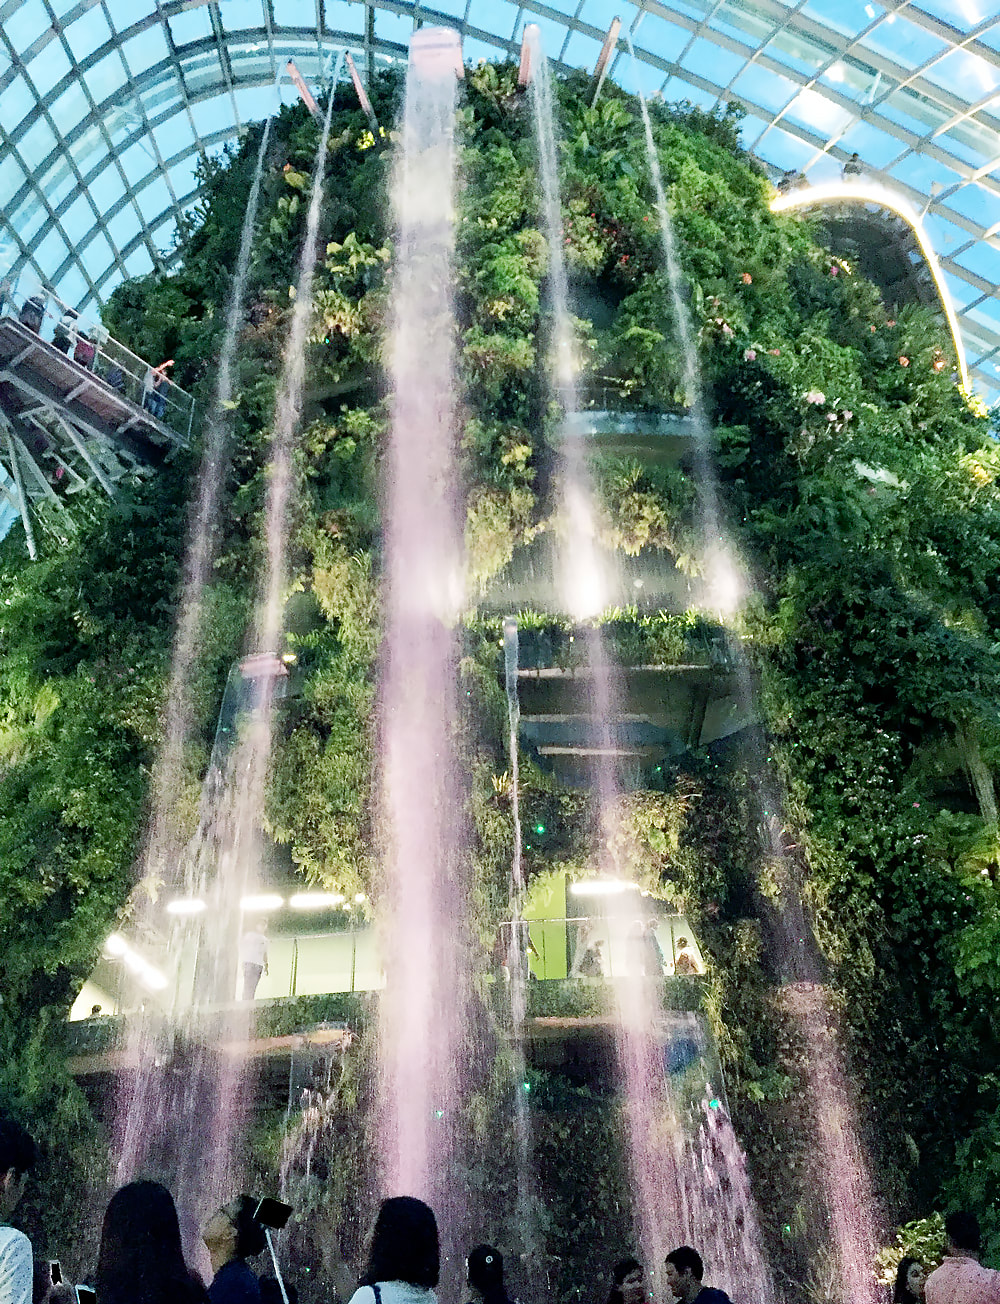 The 35-metre tall waterfall inside of the Cloud Forest at Gardens by the Bay, Singapore.